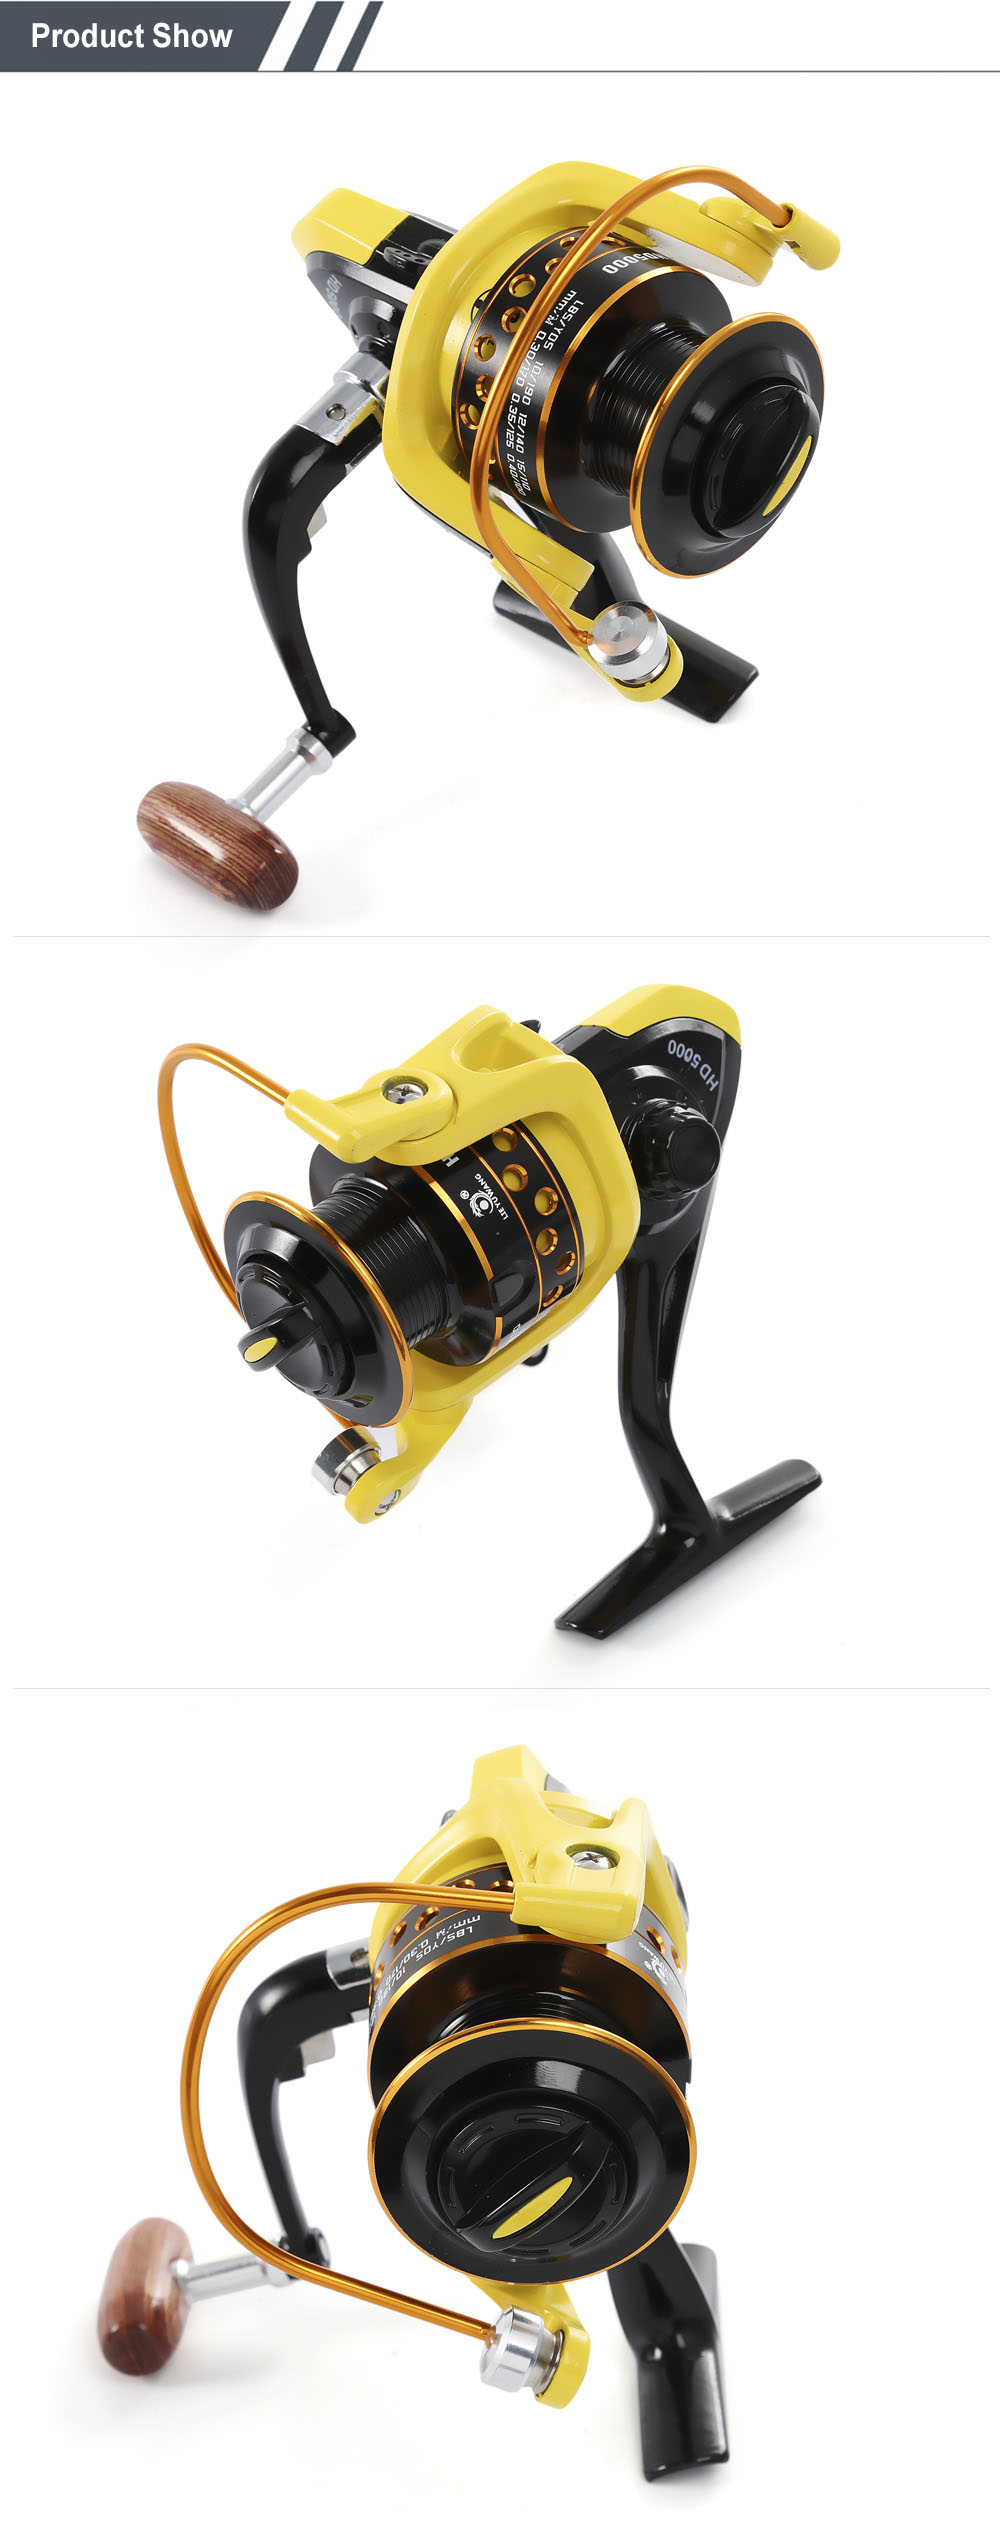 LIEYUWANG Full Metal Fishing Spinning Reel with Exchangeable Handle